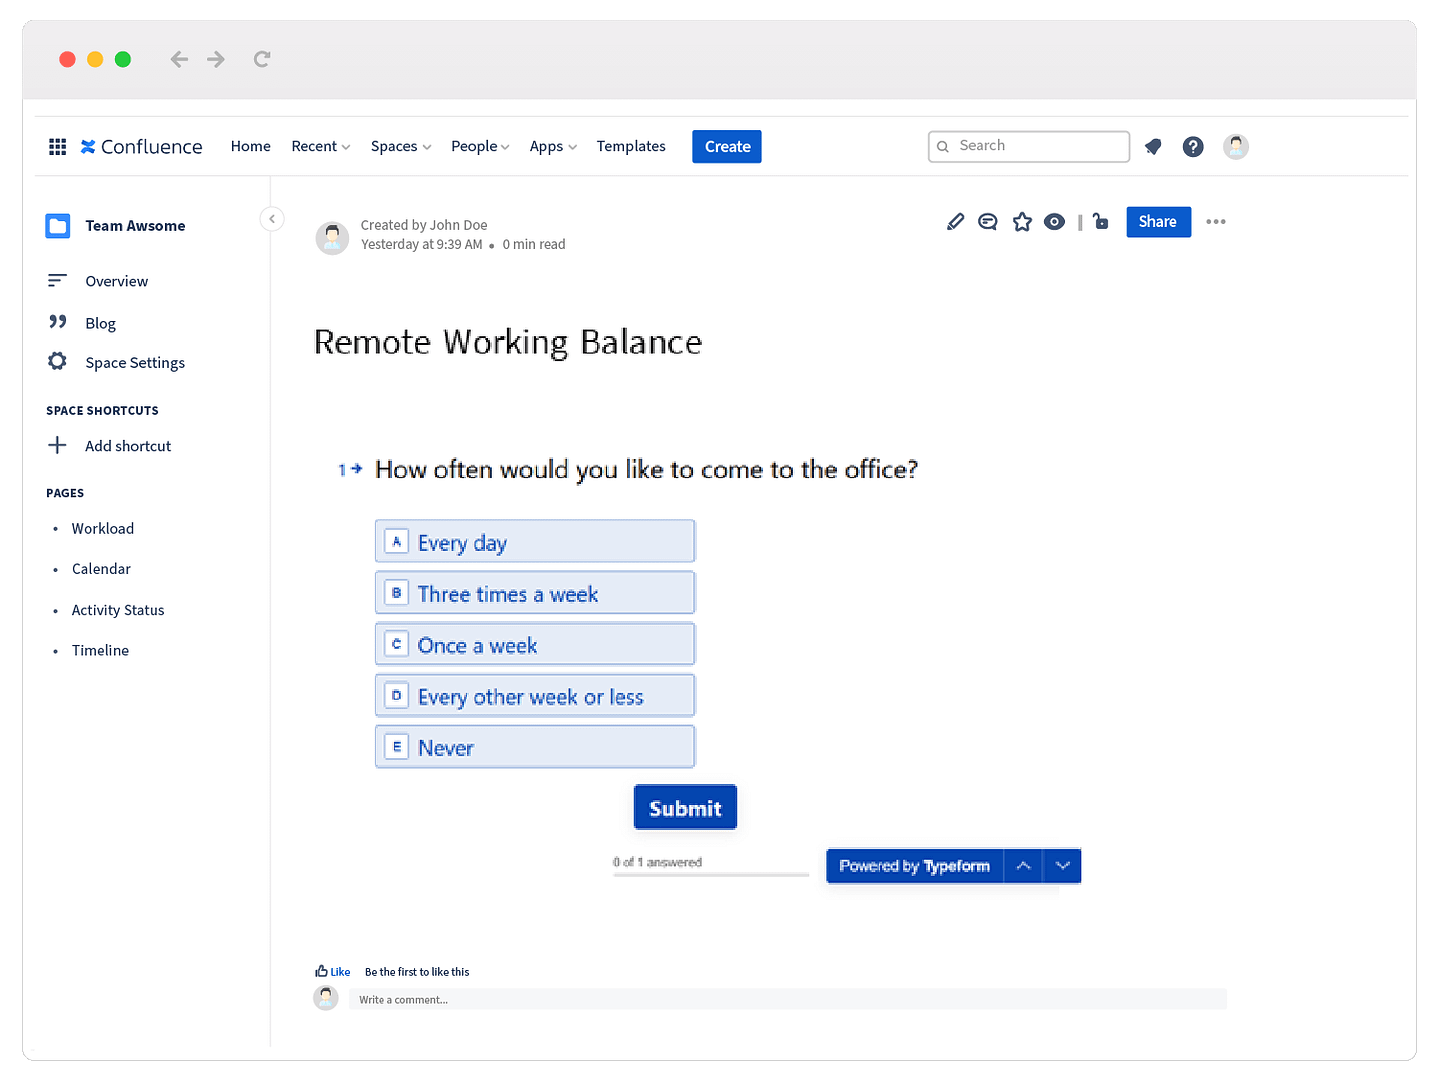 Employee survey in Typeform for Confluence